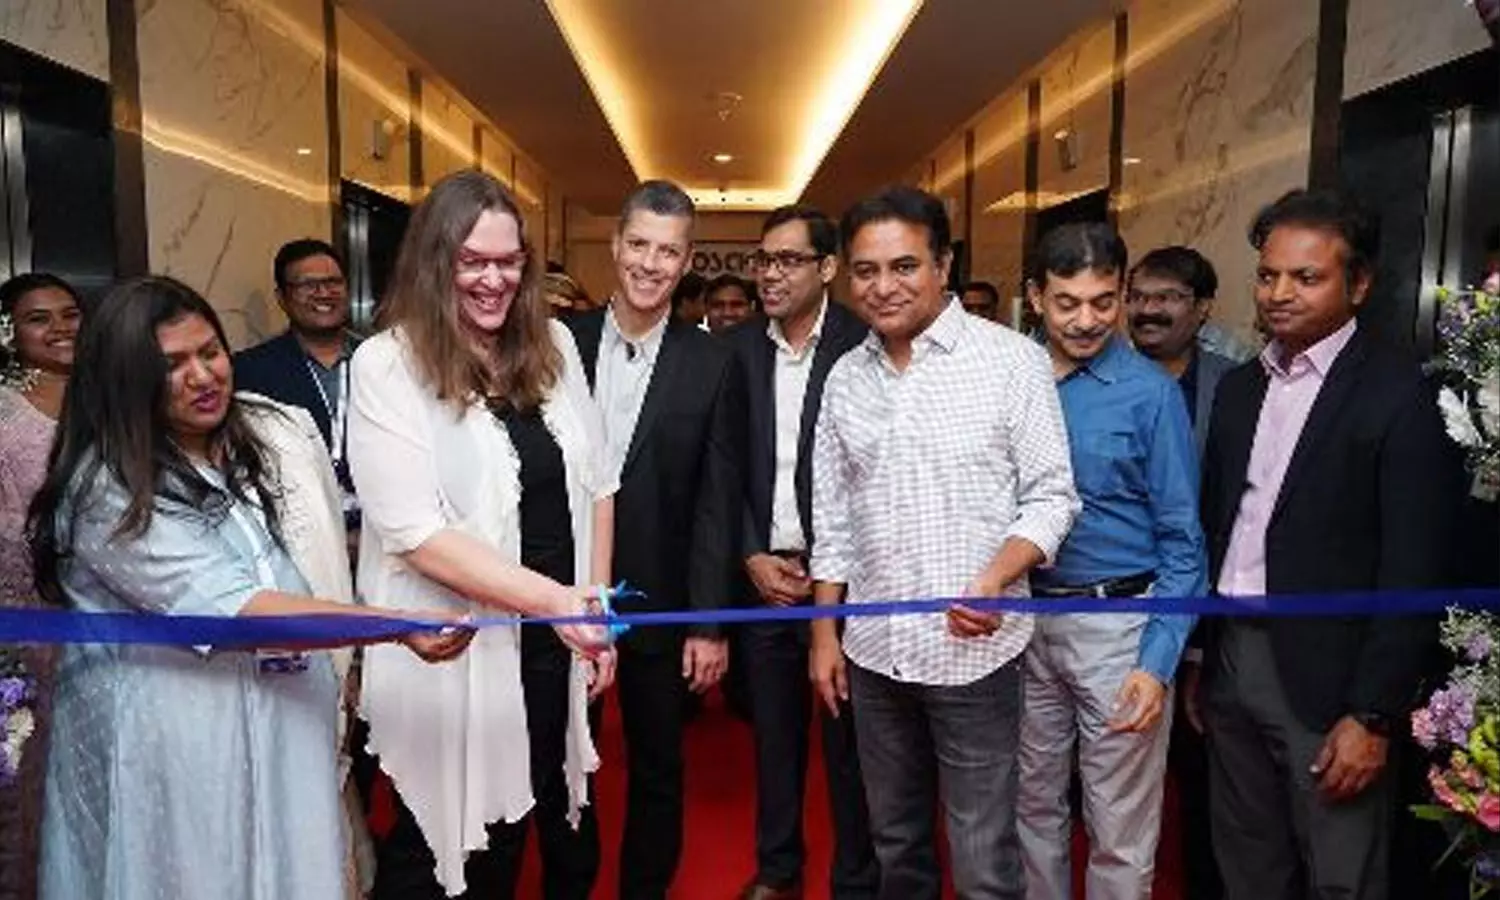 KTR lays emphasis on cybersecurity at CyberArk opening in Hyderabad